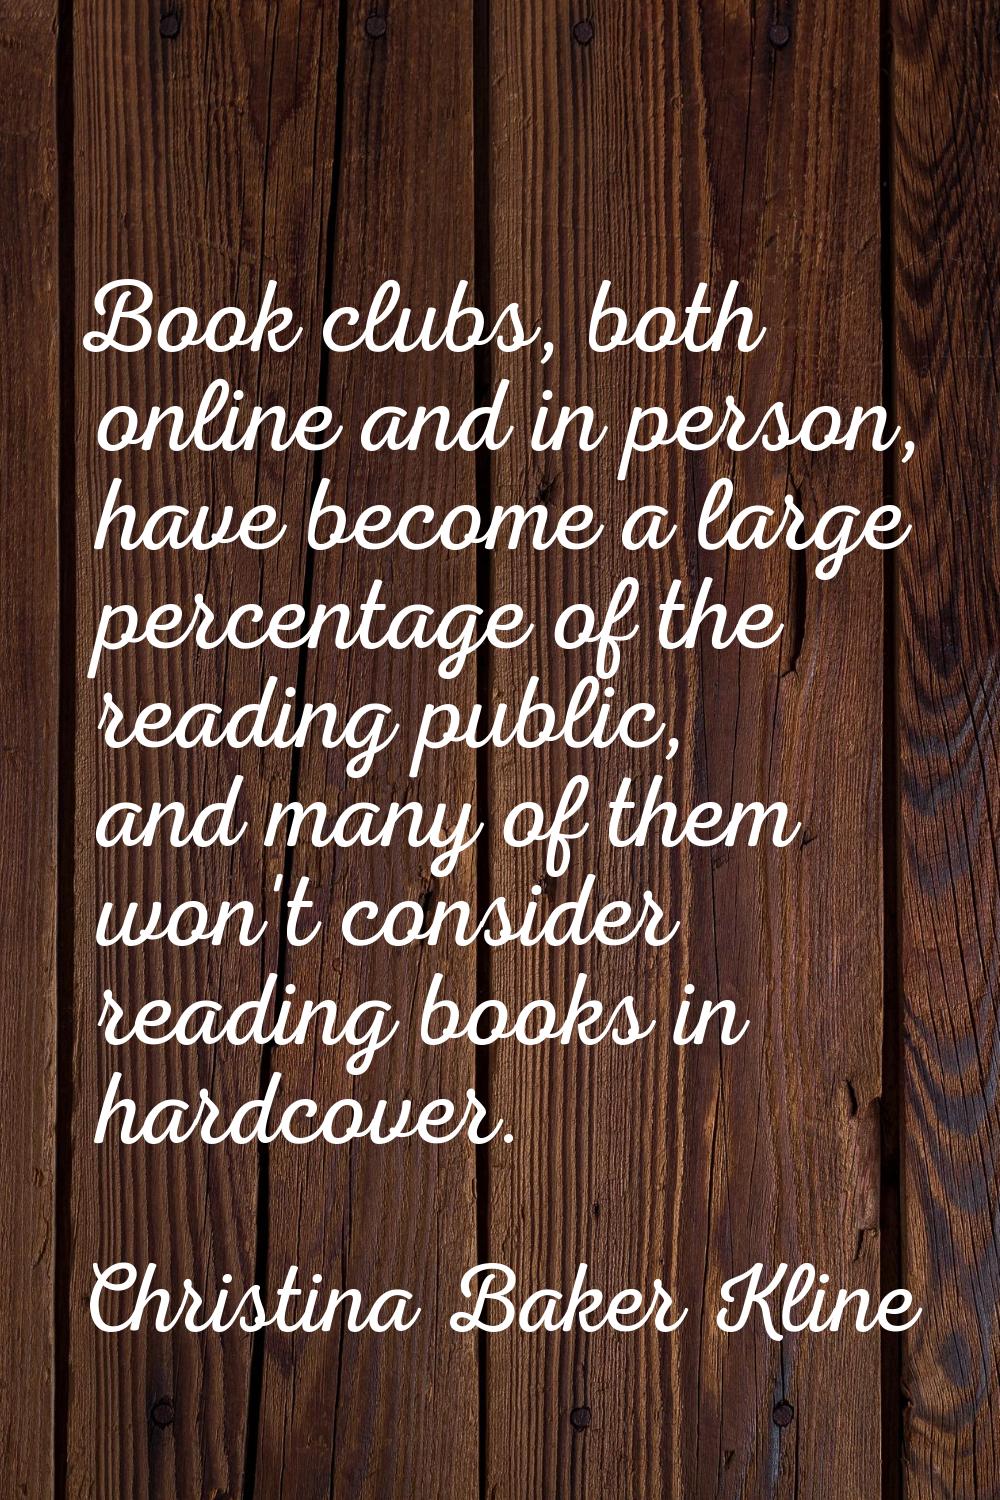 Book clubs, both online and in person, have become a large percentage of the reading public, and ma